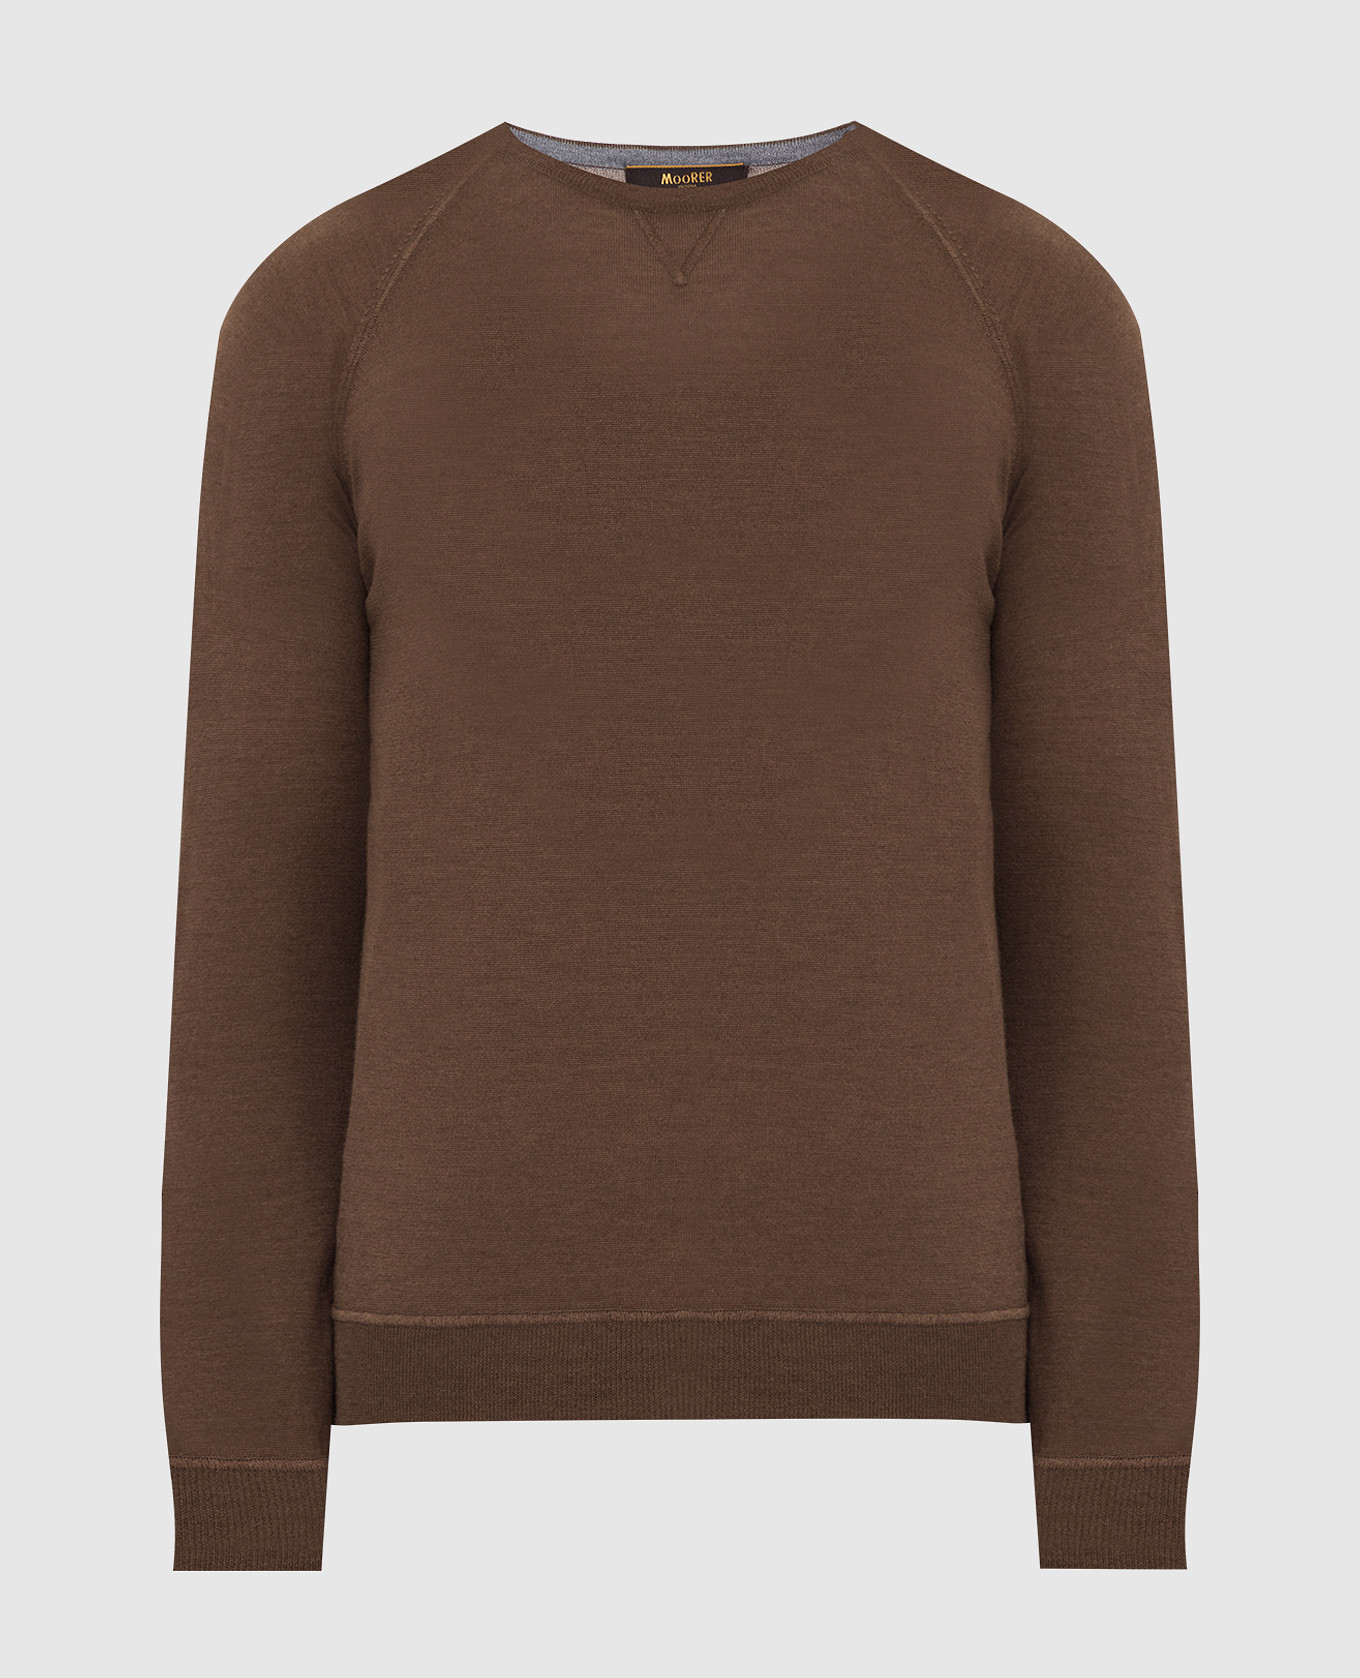 Pico jumper in wool, silk and cashmere